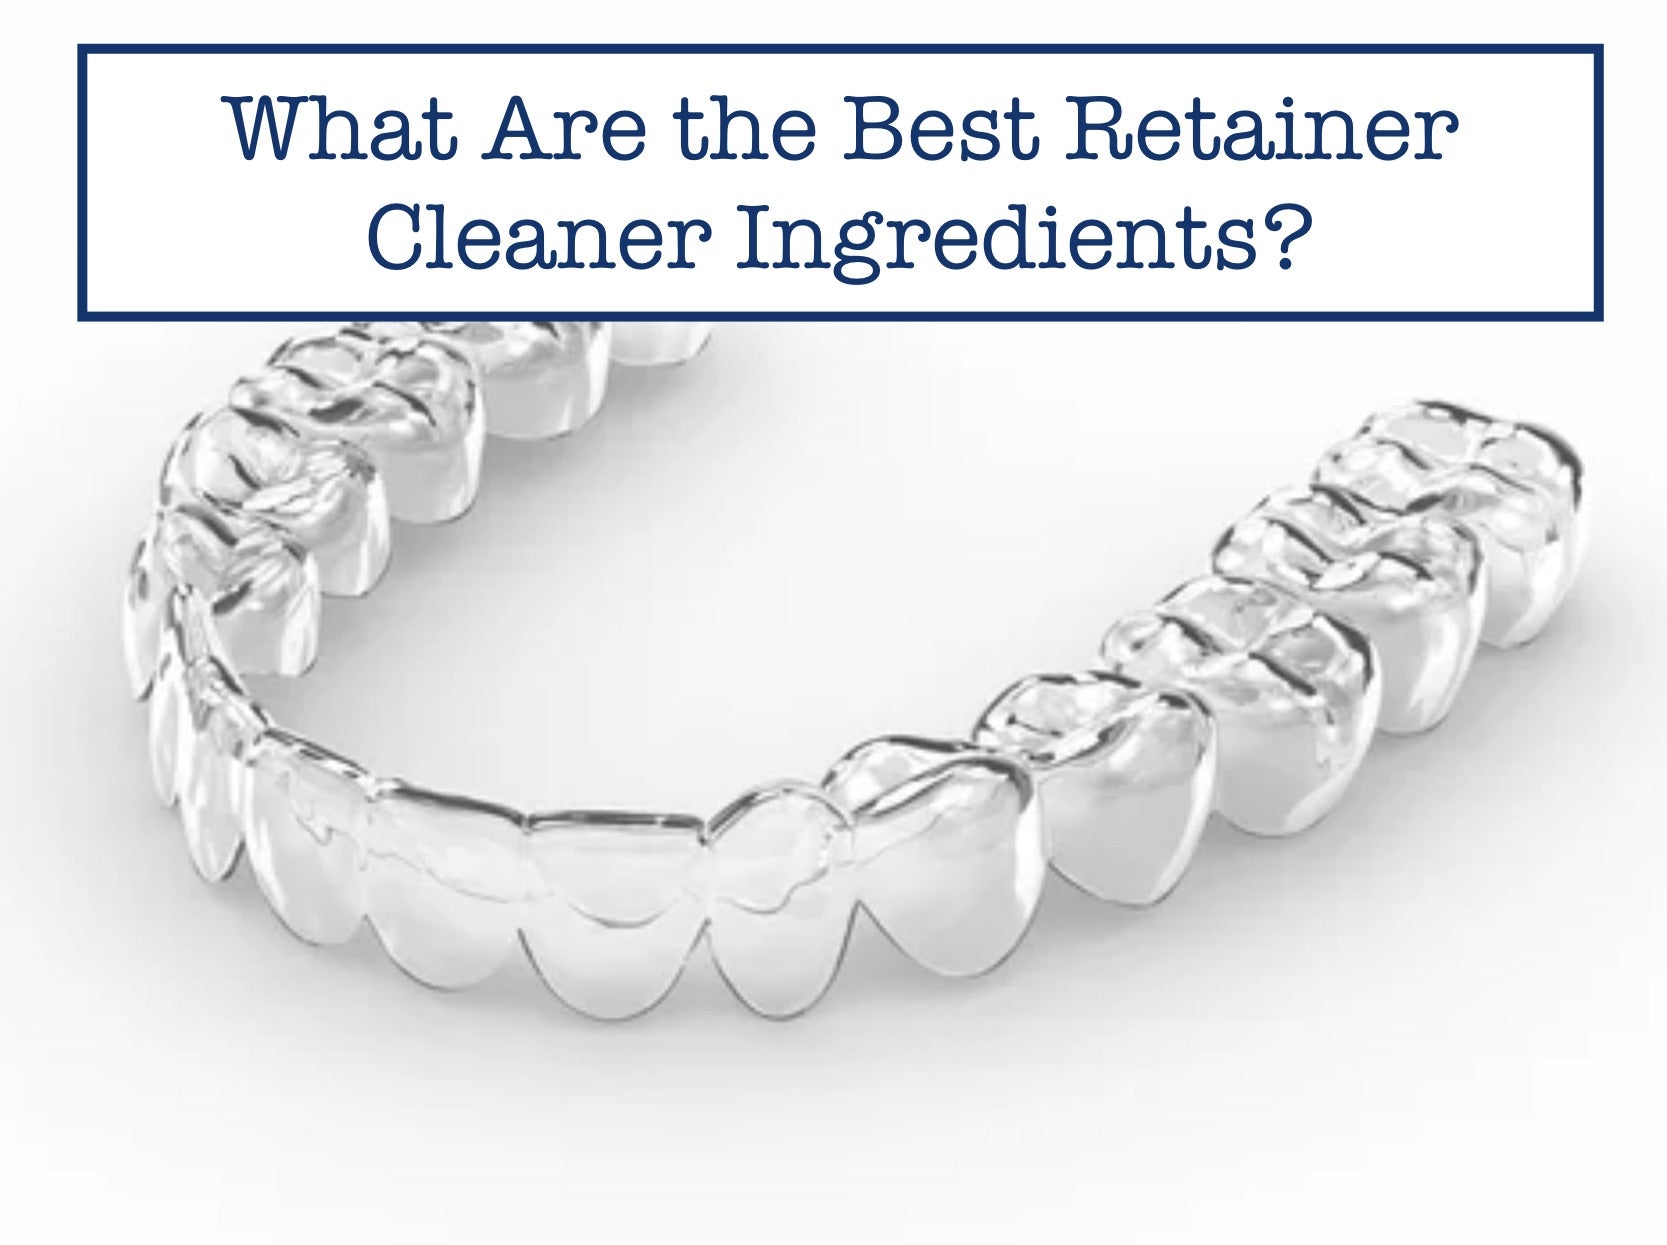 What Are the Best Retainer Cleaner Ingredients?